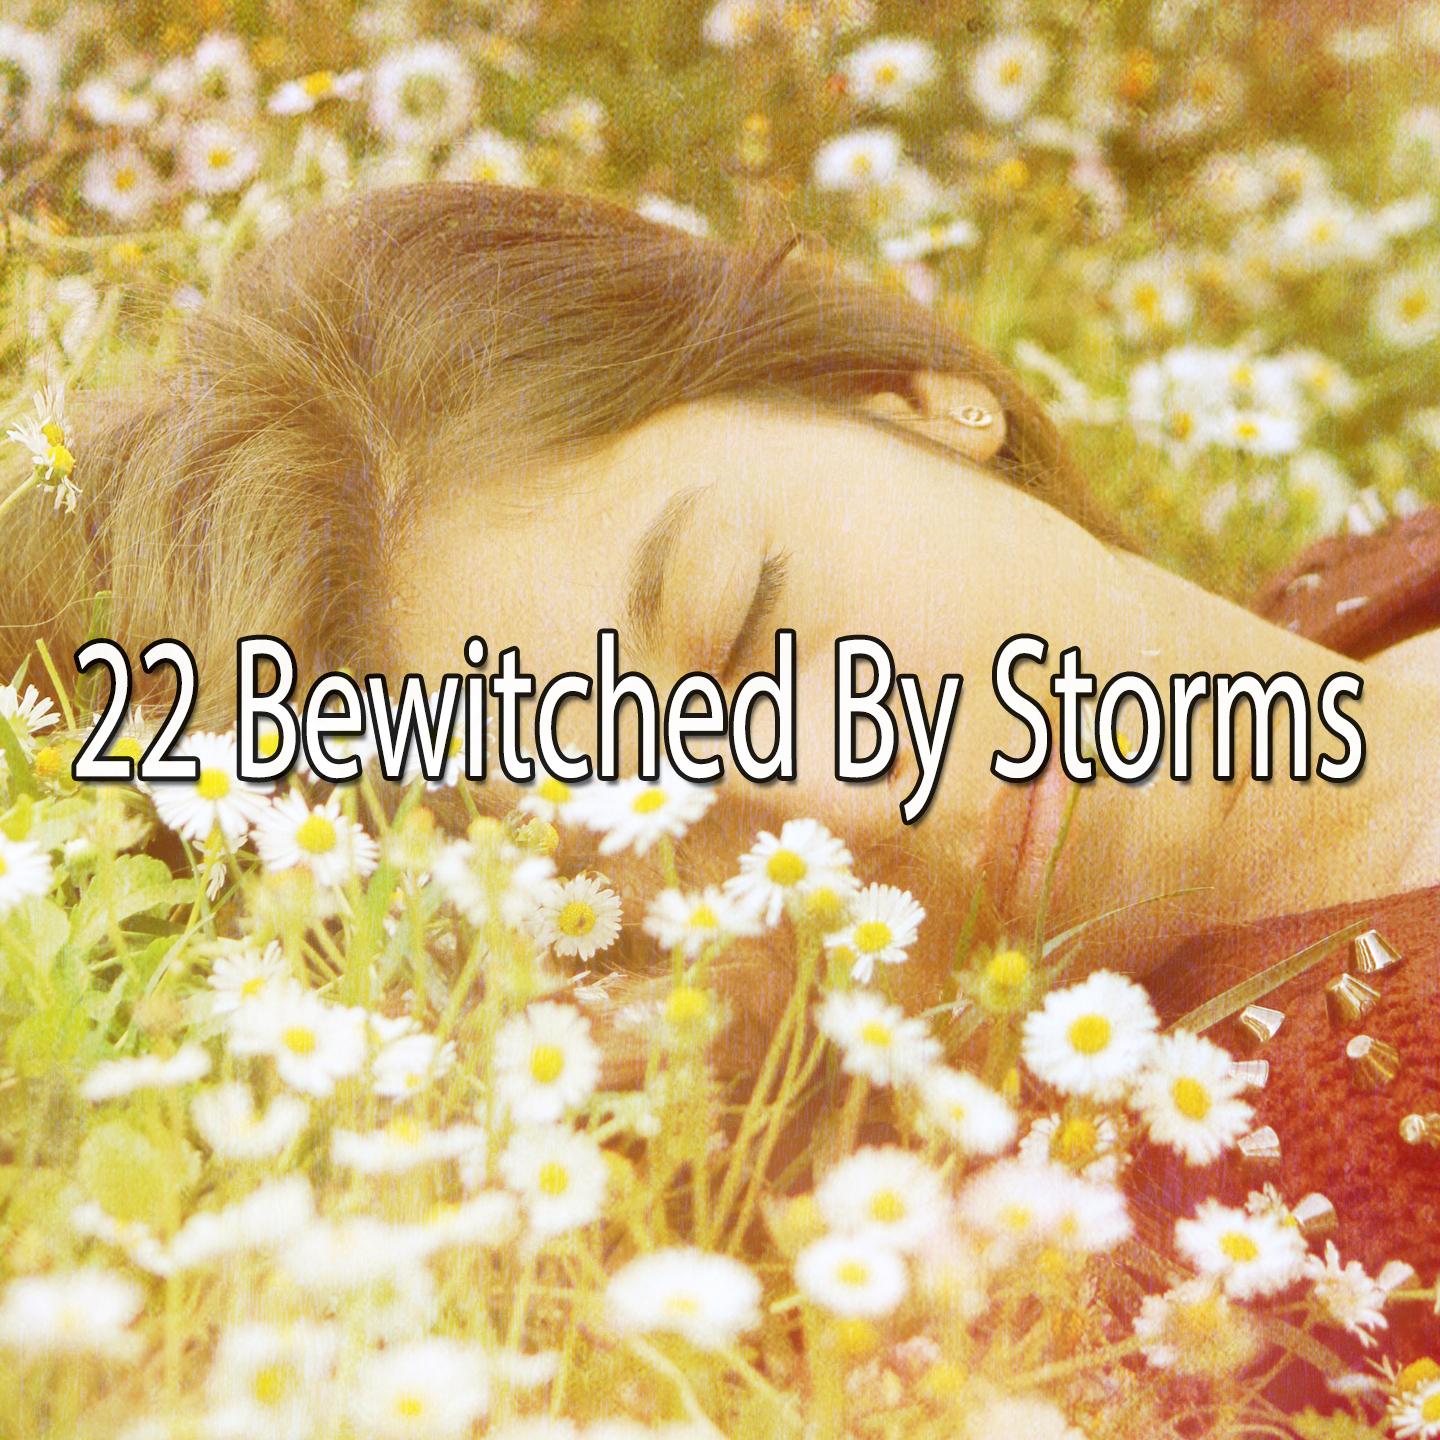 22 Bewitched by Storms